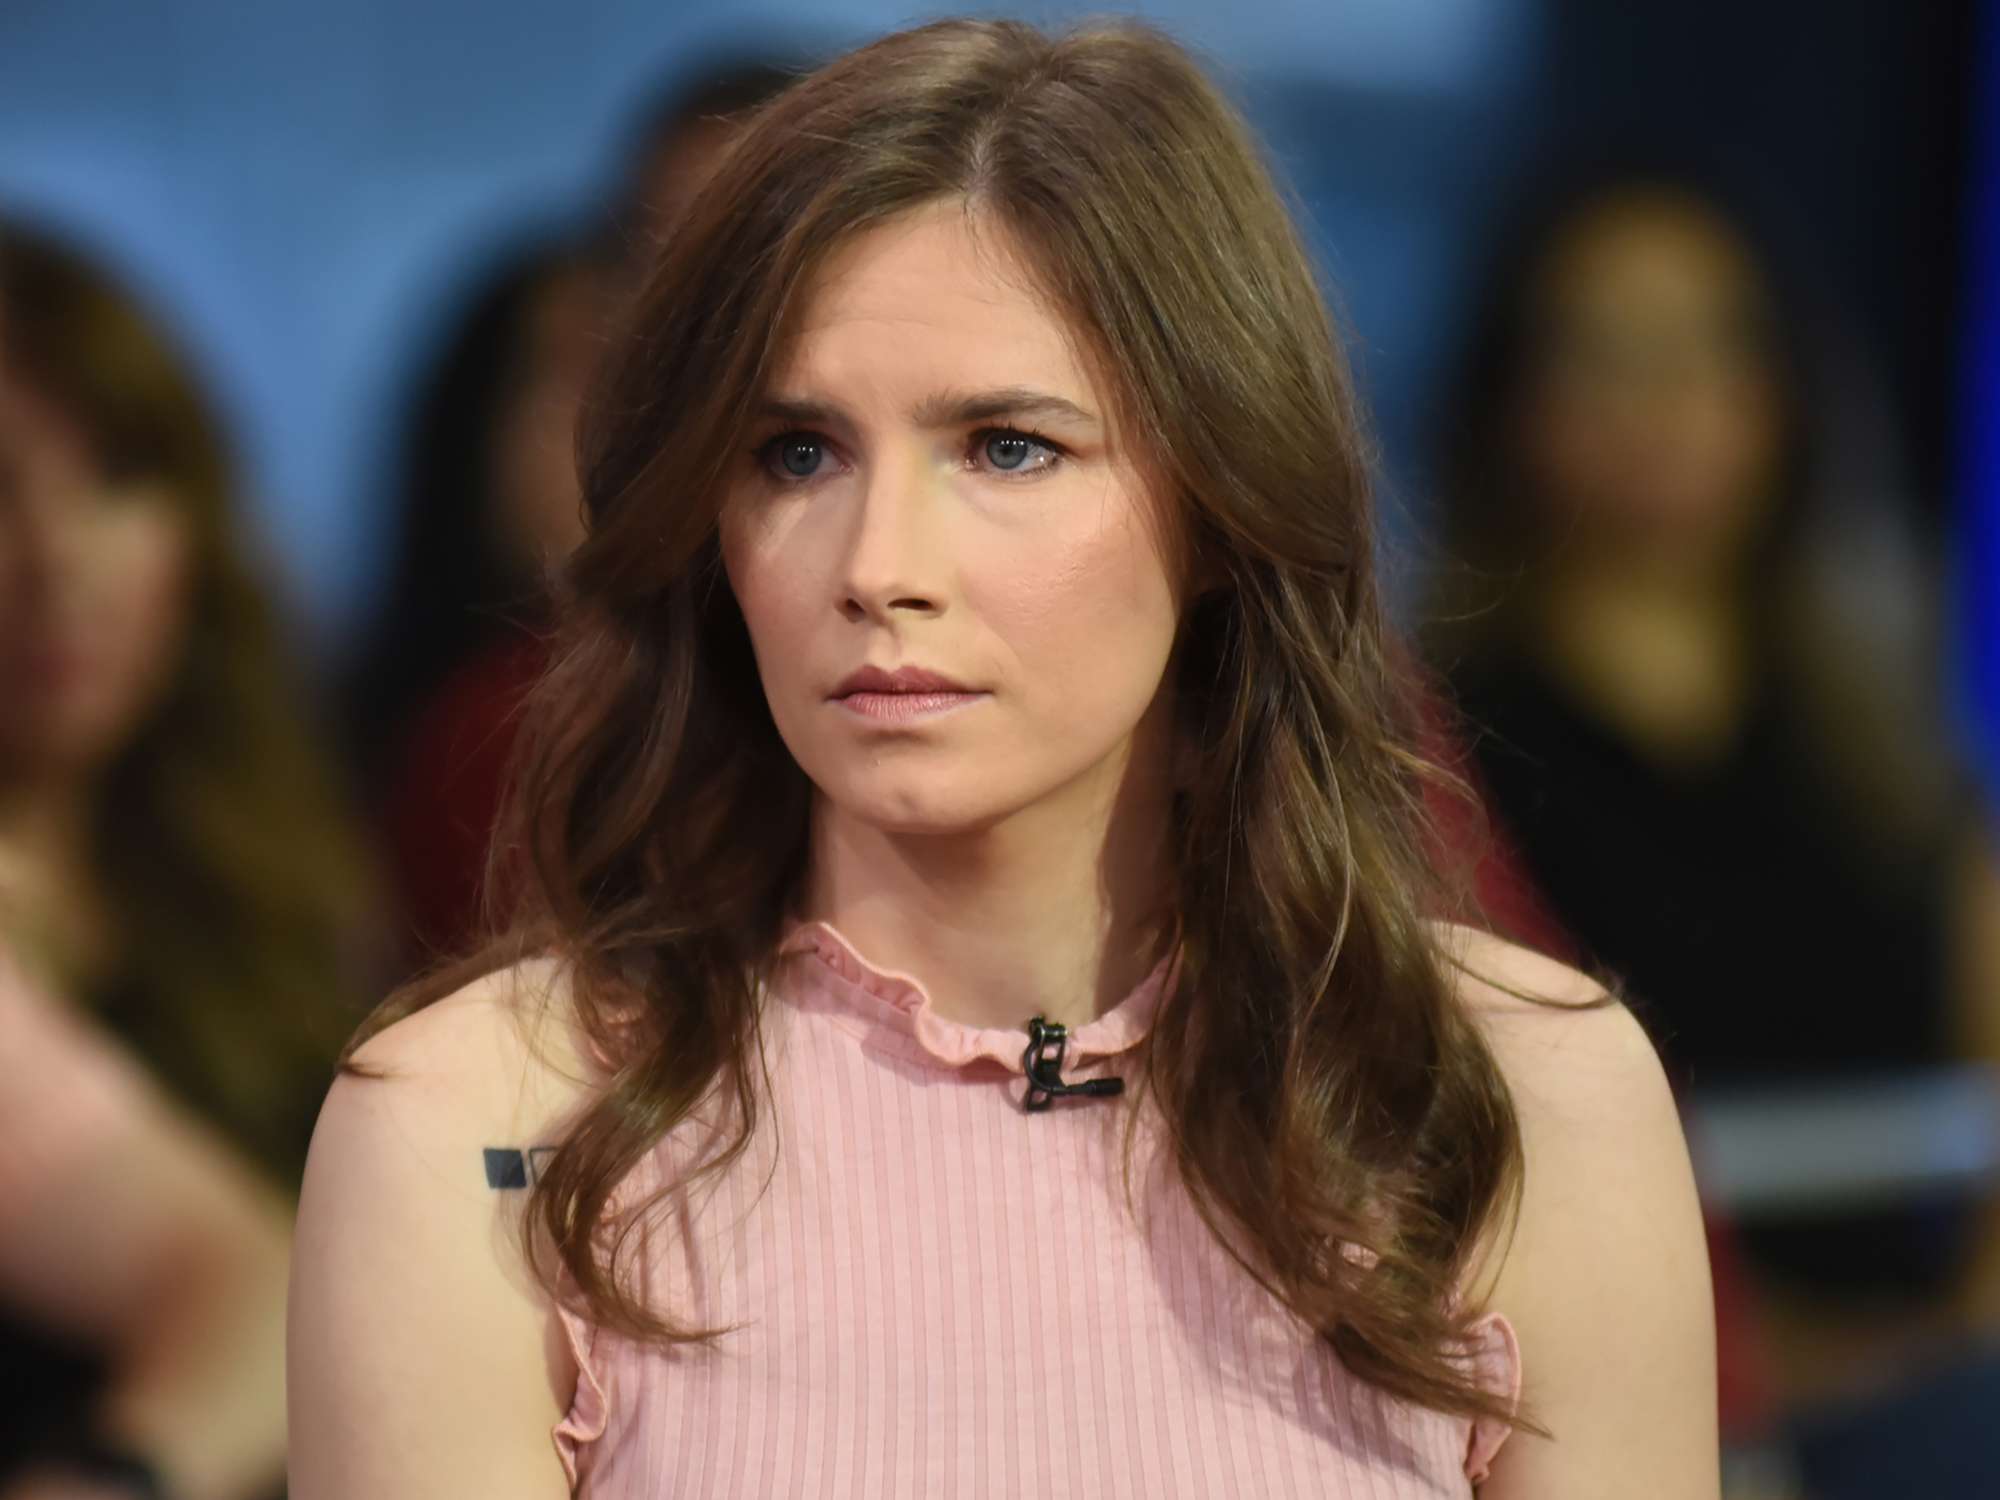 Amanda Knox Was Just Re-Convicted of Slander: Here's What It Means